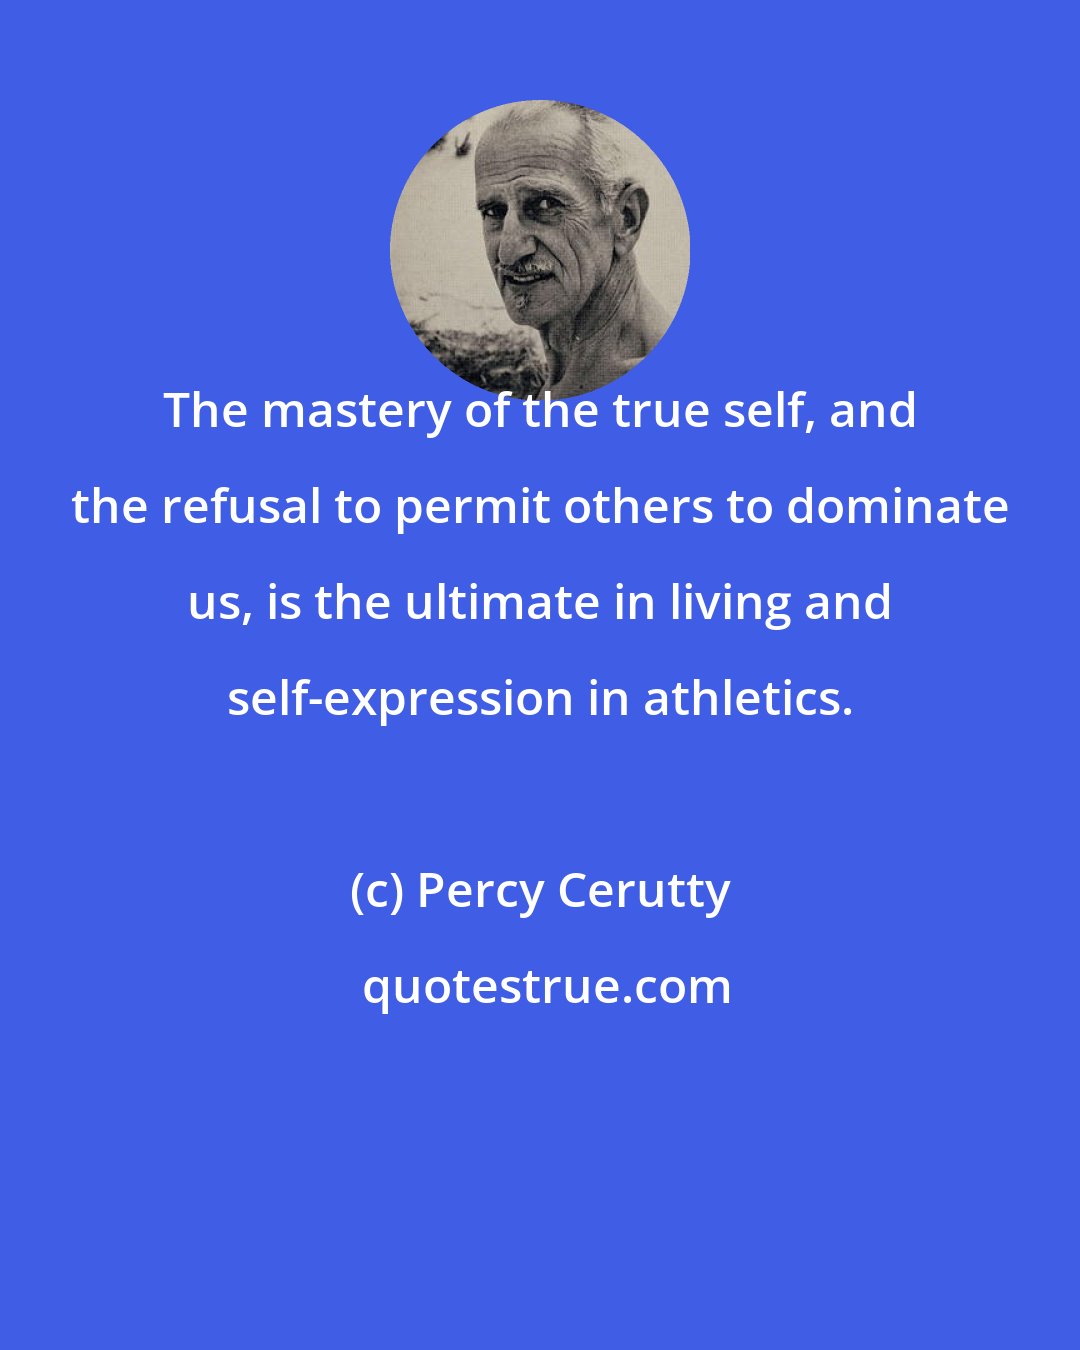 Percy Cerutty: The mastery of the true self, and the refusal to permit others to dominate us, is the ultimate in living and self-expression in athletics.